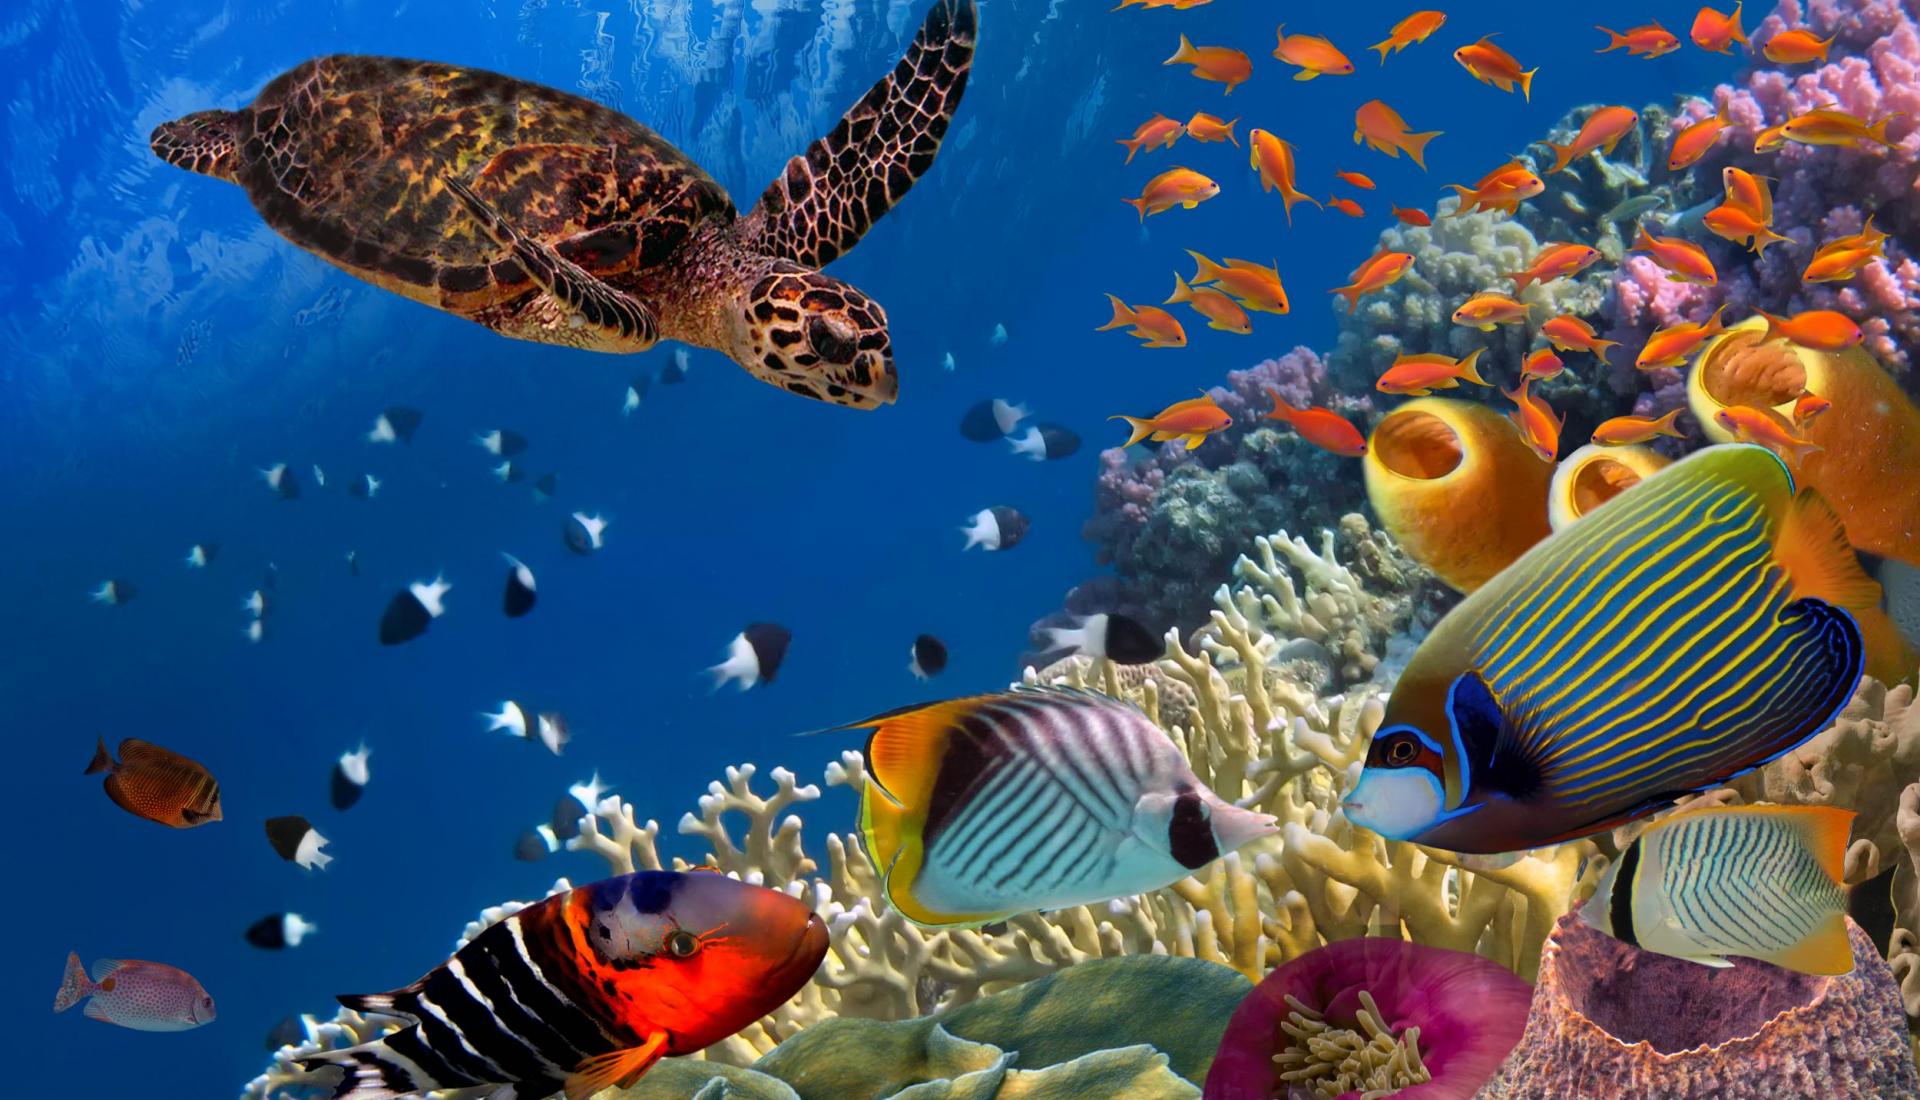 15 Marine Life & Ocean Facts to Blow You Away! 